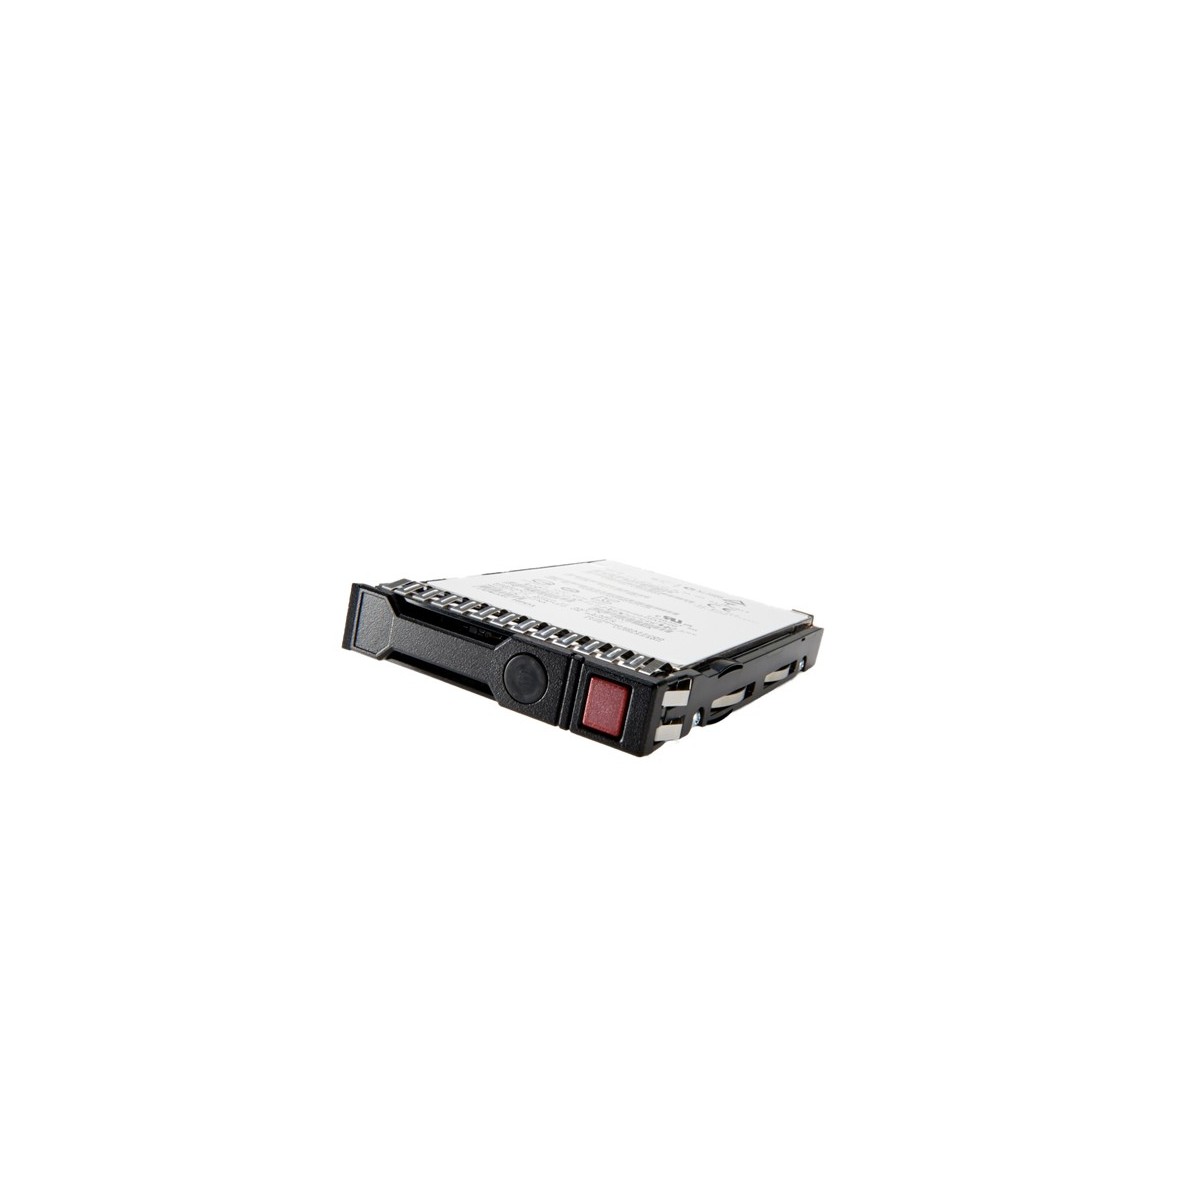 HPE SSD 960GB SAS 12G MU SFF 2.5" SC Value - Solid State Disk - Serial Attached SCSI (SAS)